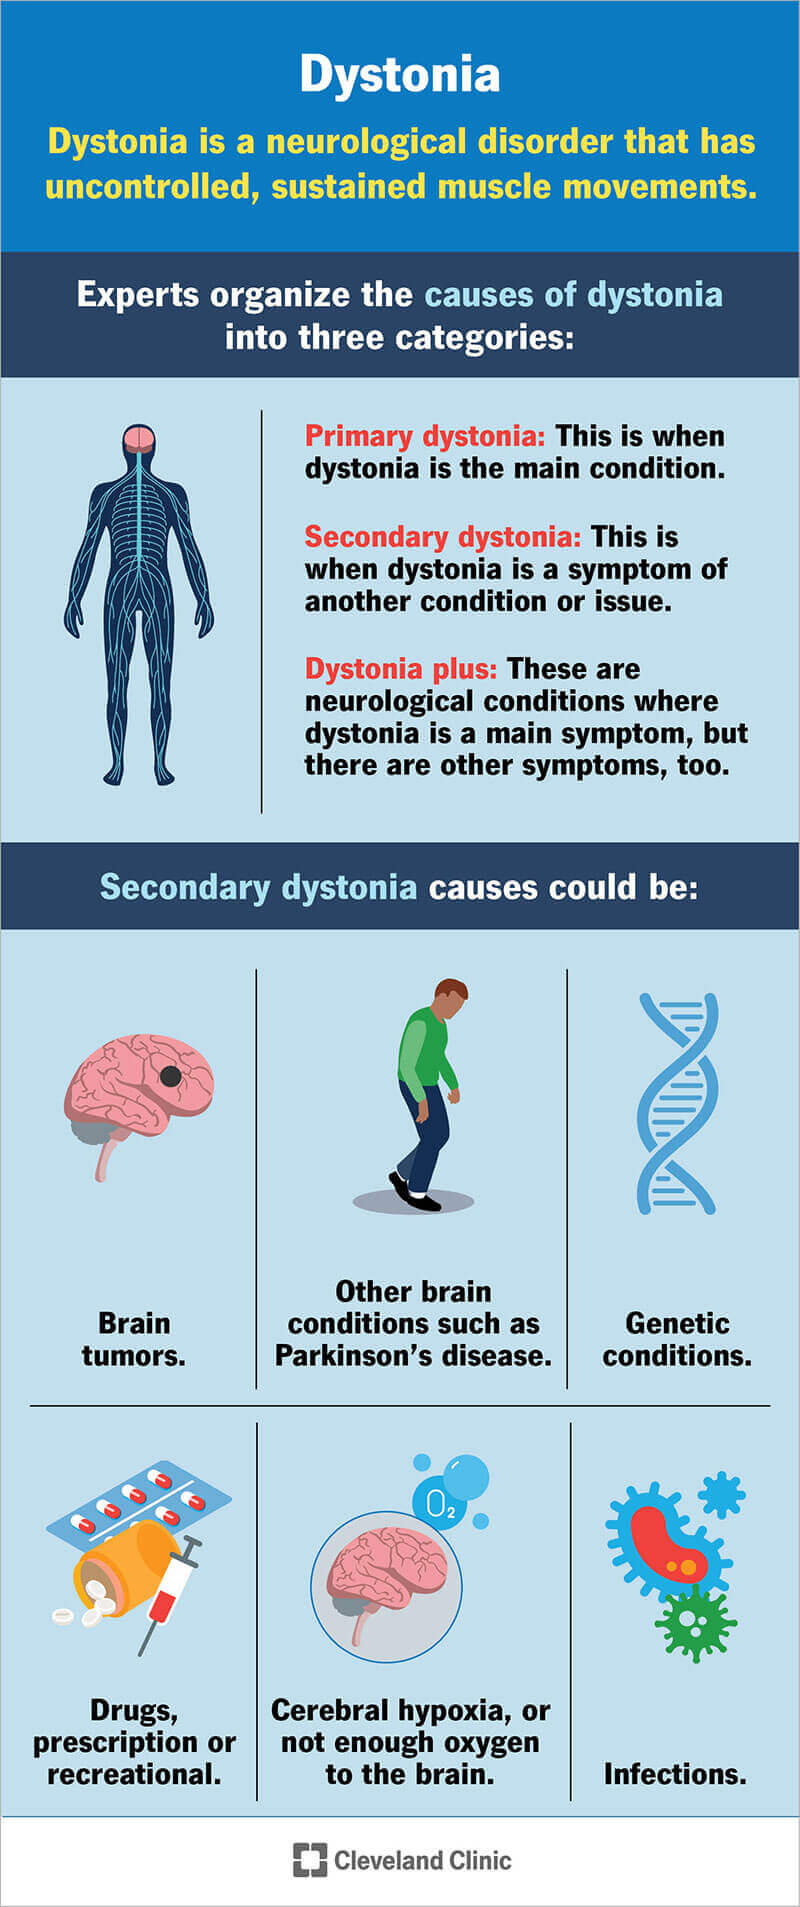 Dystonia can causes uncontrolled muscle movements, and its effects depend on where it happens in the body and what causes it.